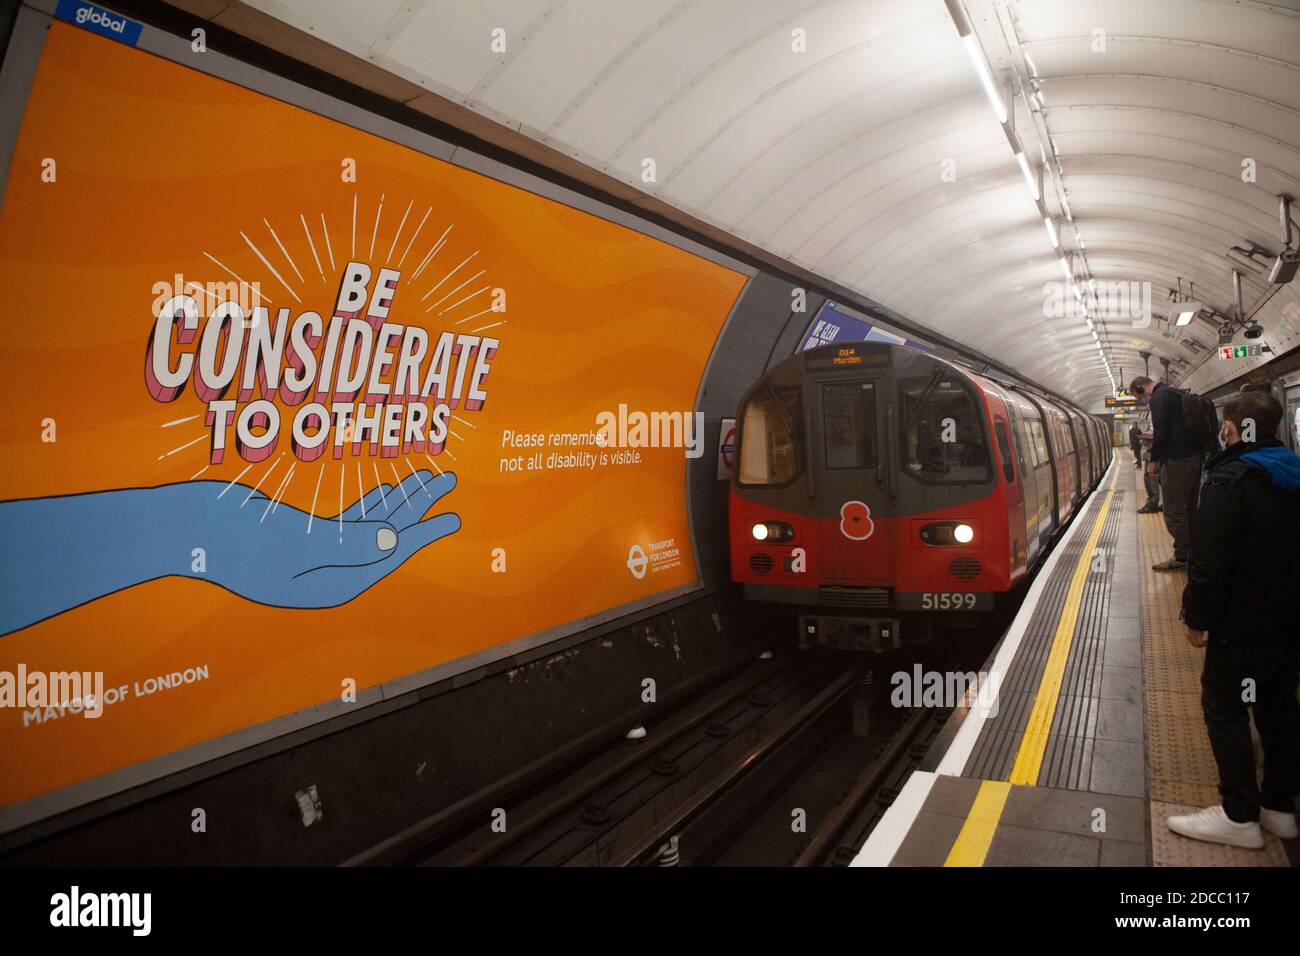 London, UK, 19 November 2020: Posters from the Mayor of London advise people to be considerate to others who may have an invisible disability. Anna Watson/Alamy Live News Stock Photo